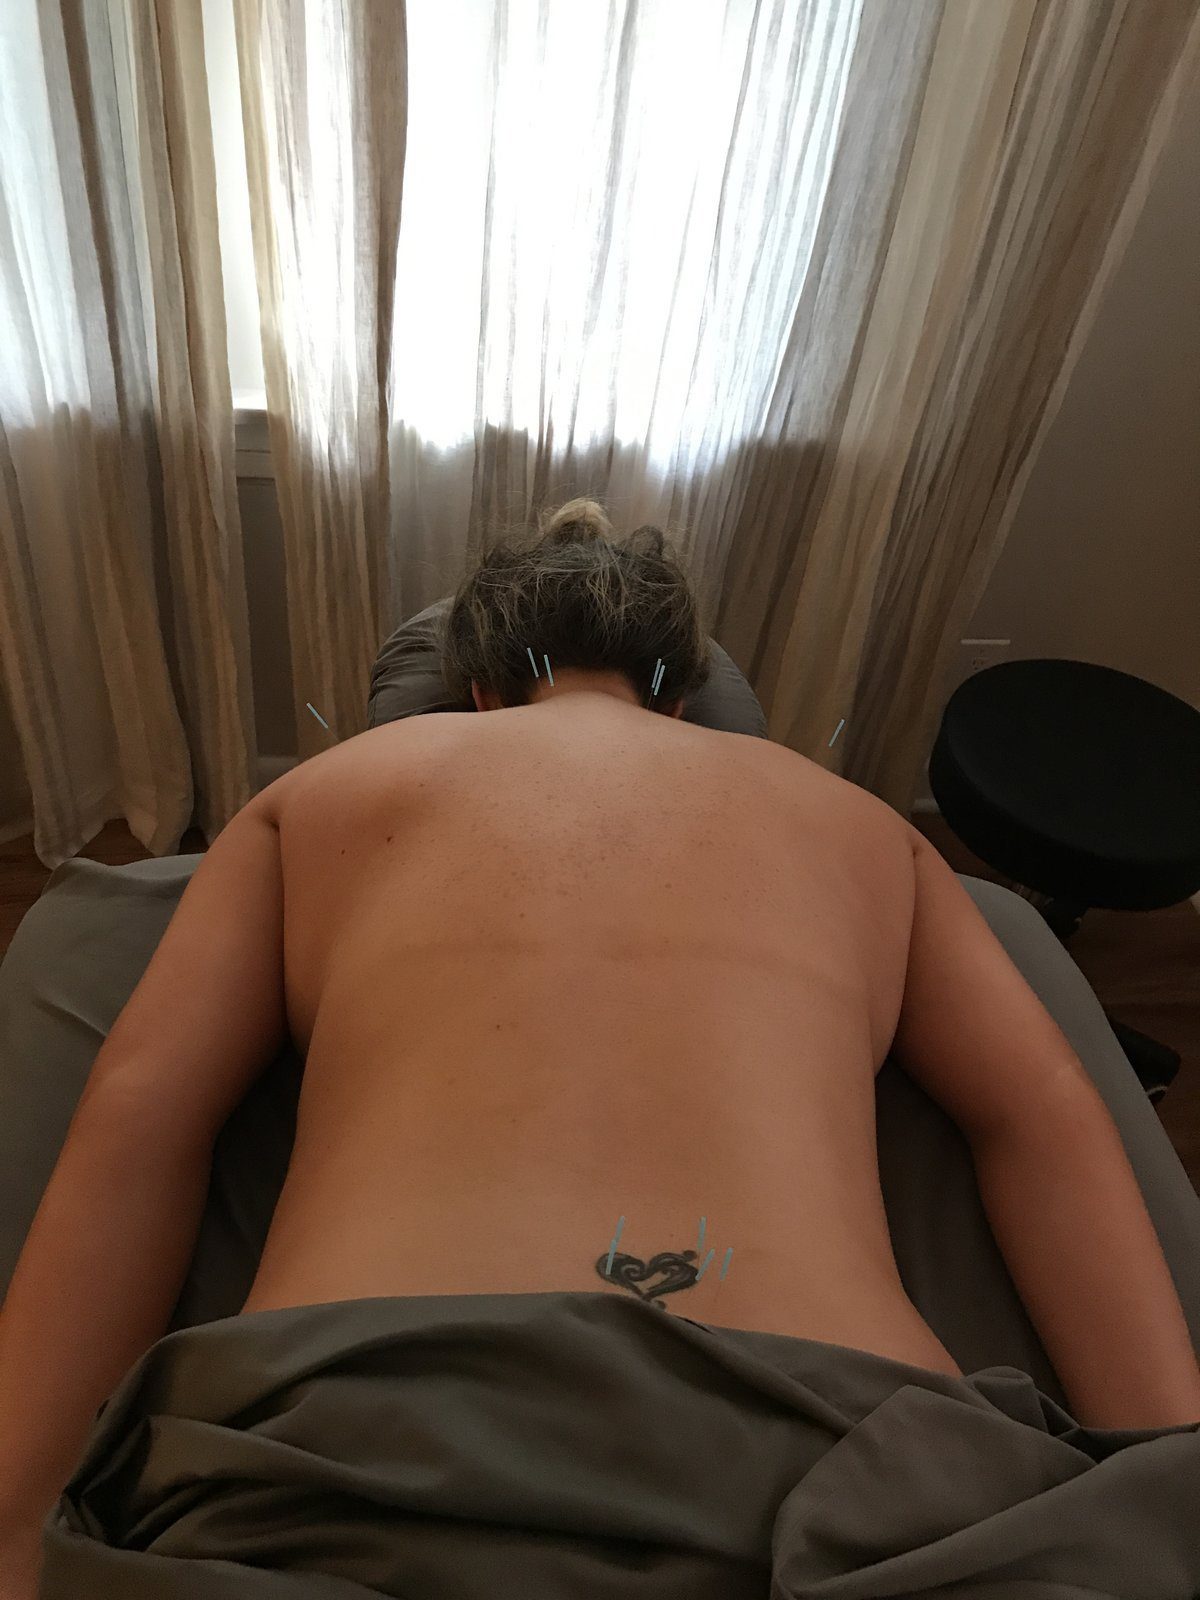 Acupuncture and cupping